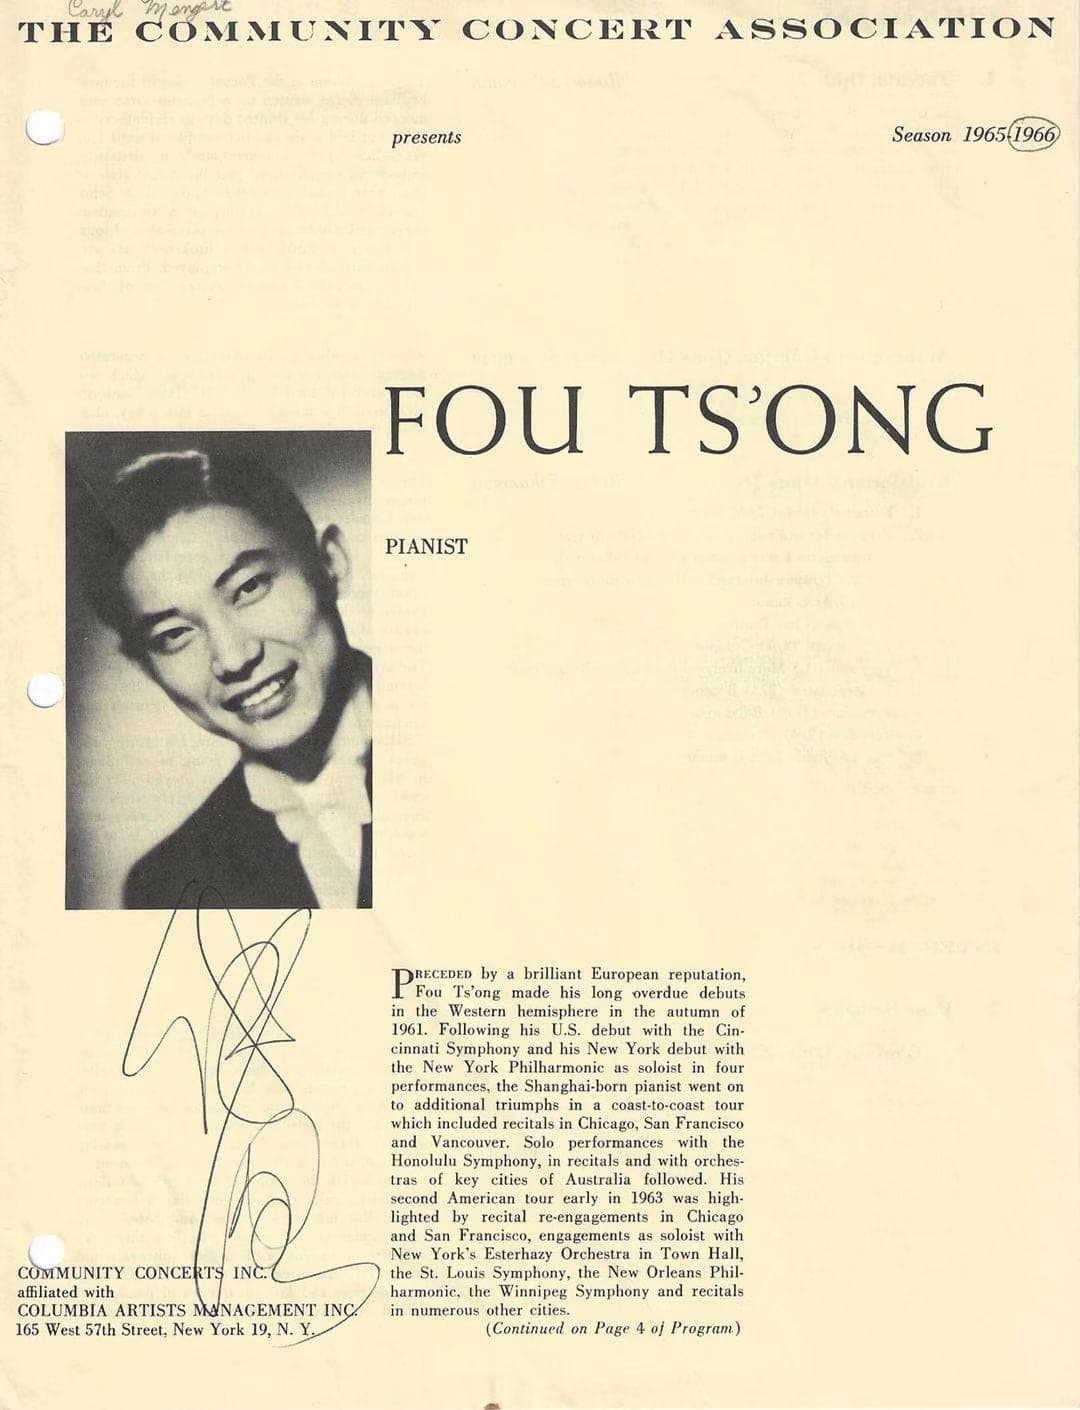 A signed programme note of Fou Ts'ong's New York performance